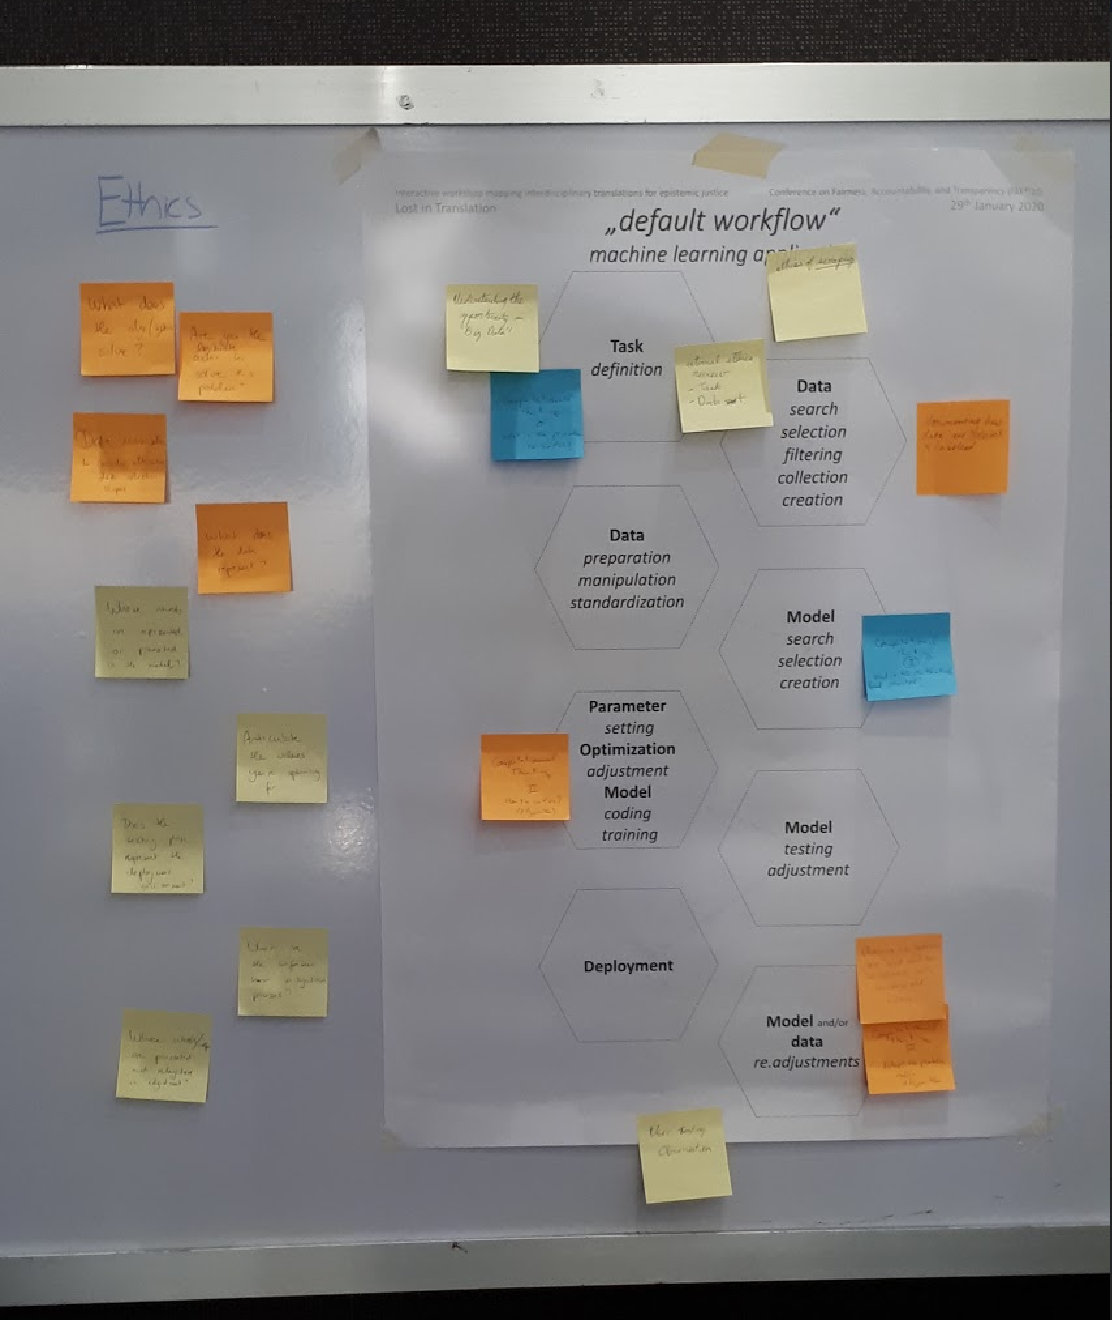 Image of a re-worked technical workflow of one of the participant groups on a whiteboard. The image portrays the prototypical workflow, post-its with added structures to the workflow, and a new section on ethics.